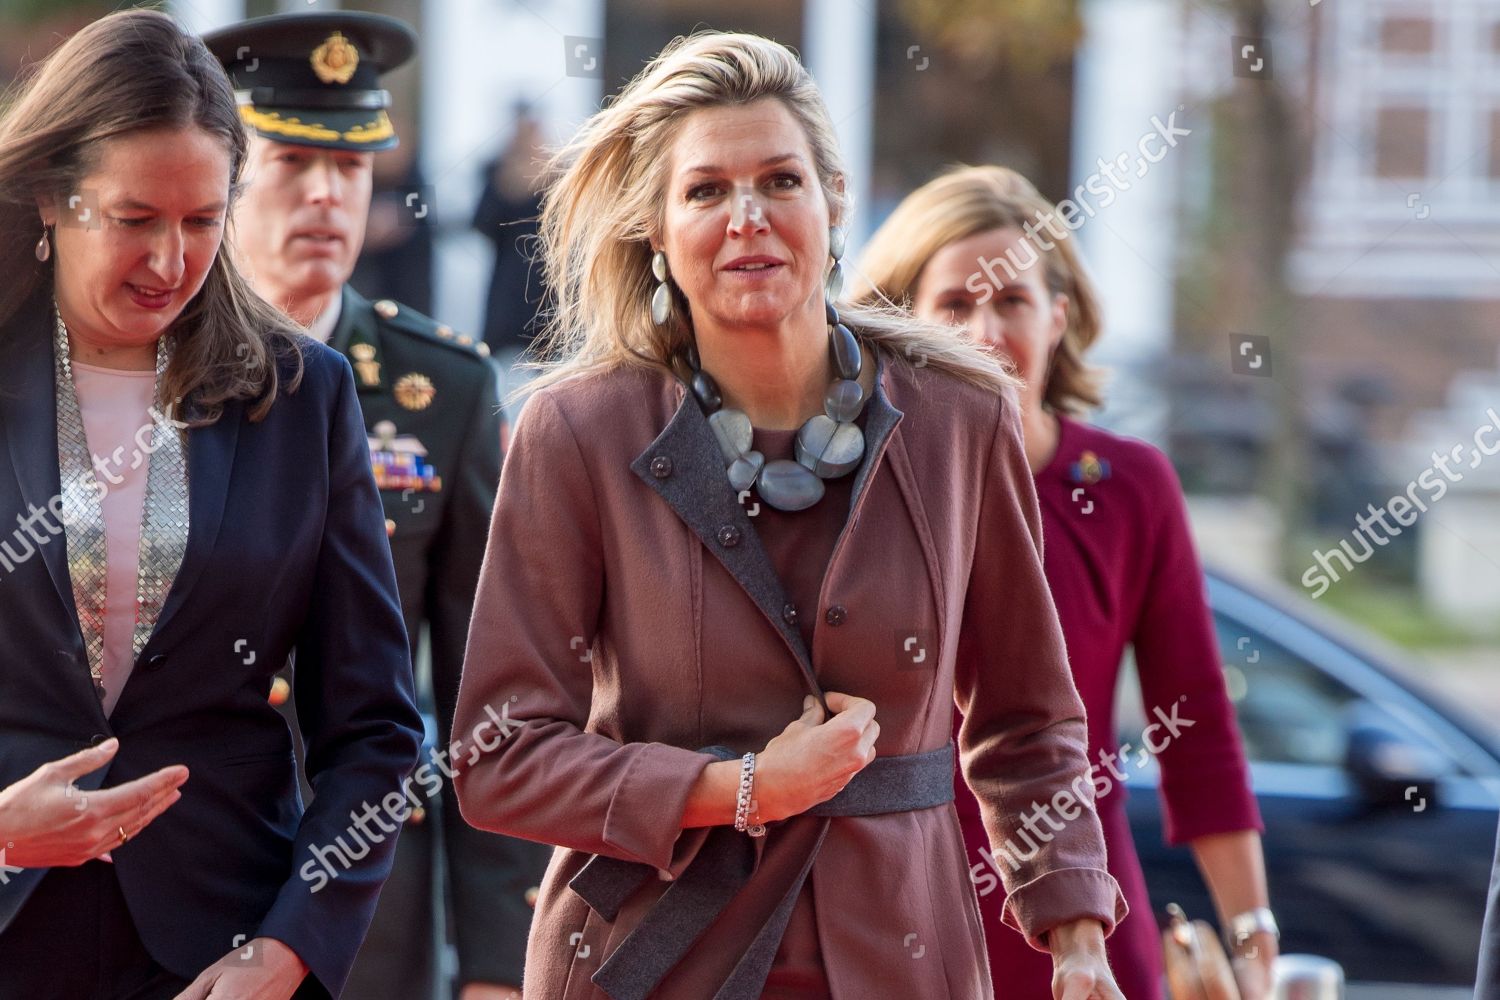 queen-maxima-visit-to-113-suicide-prevention-amsterdam-the-netherlands-shutterstock-editorial-9958871g.jpg